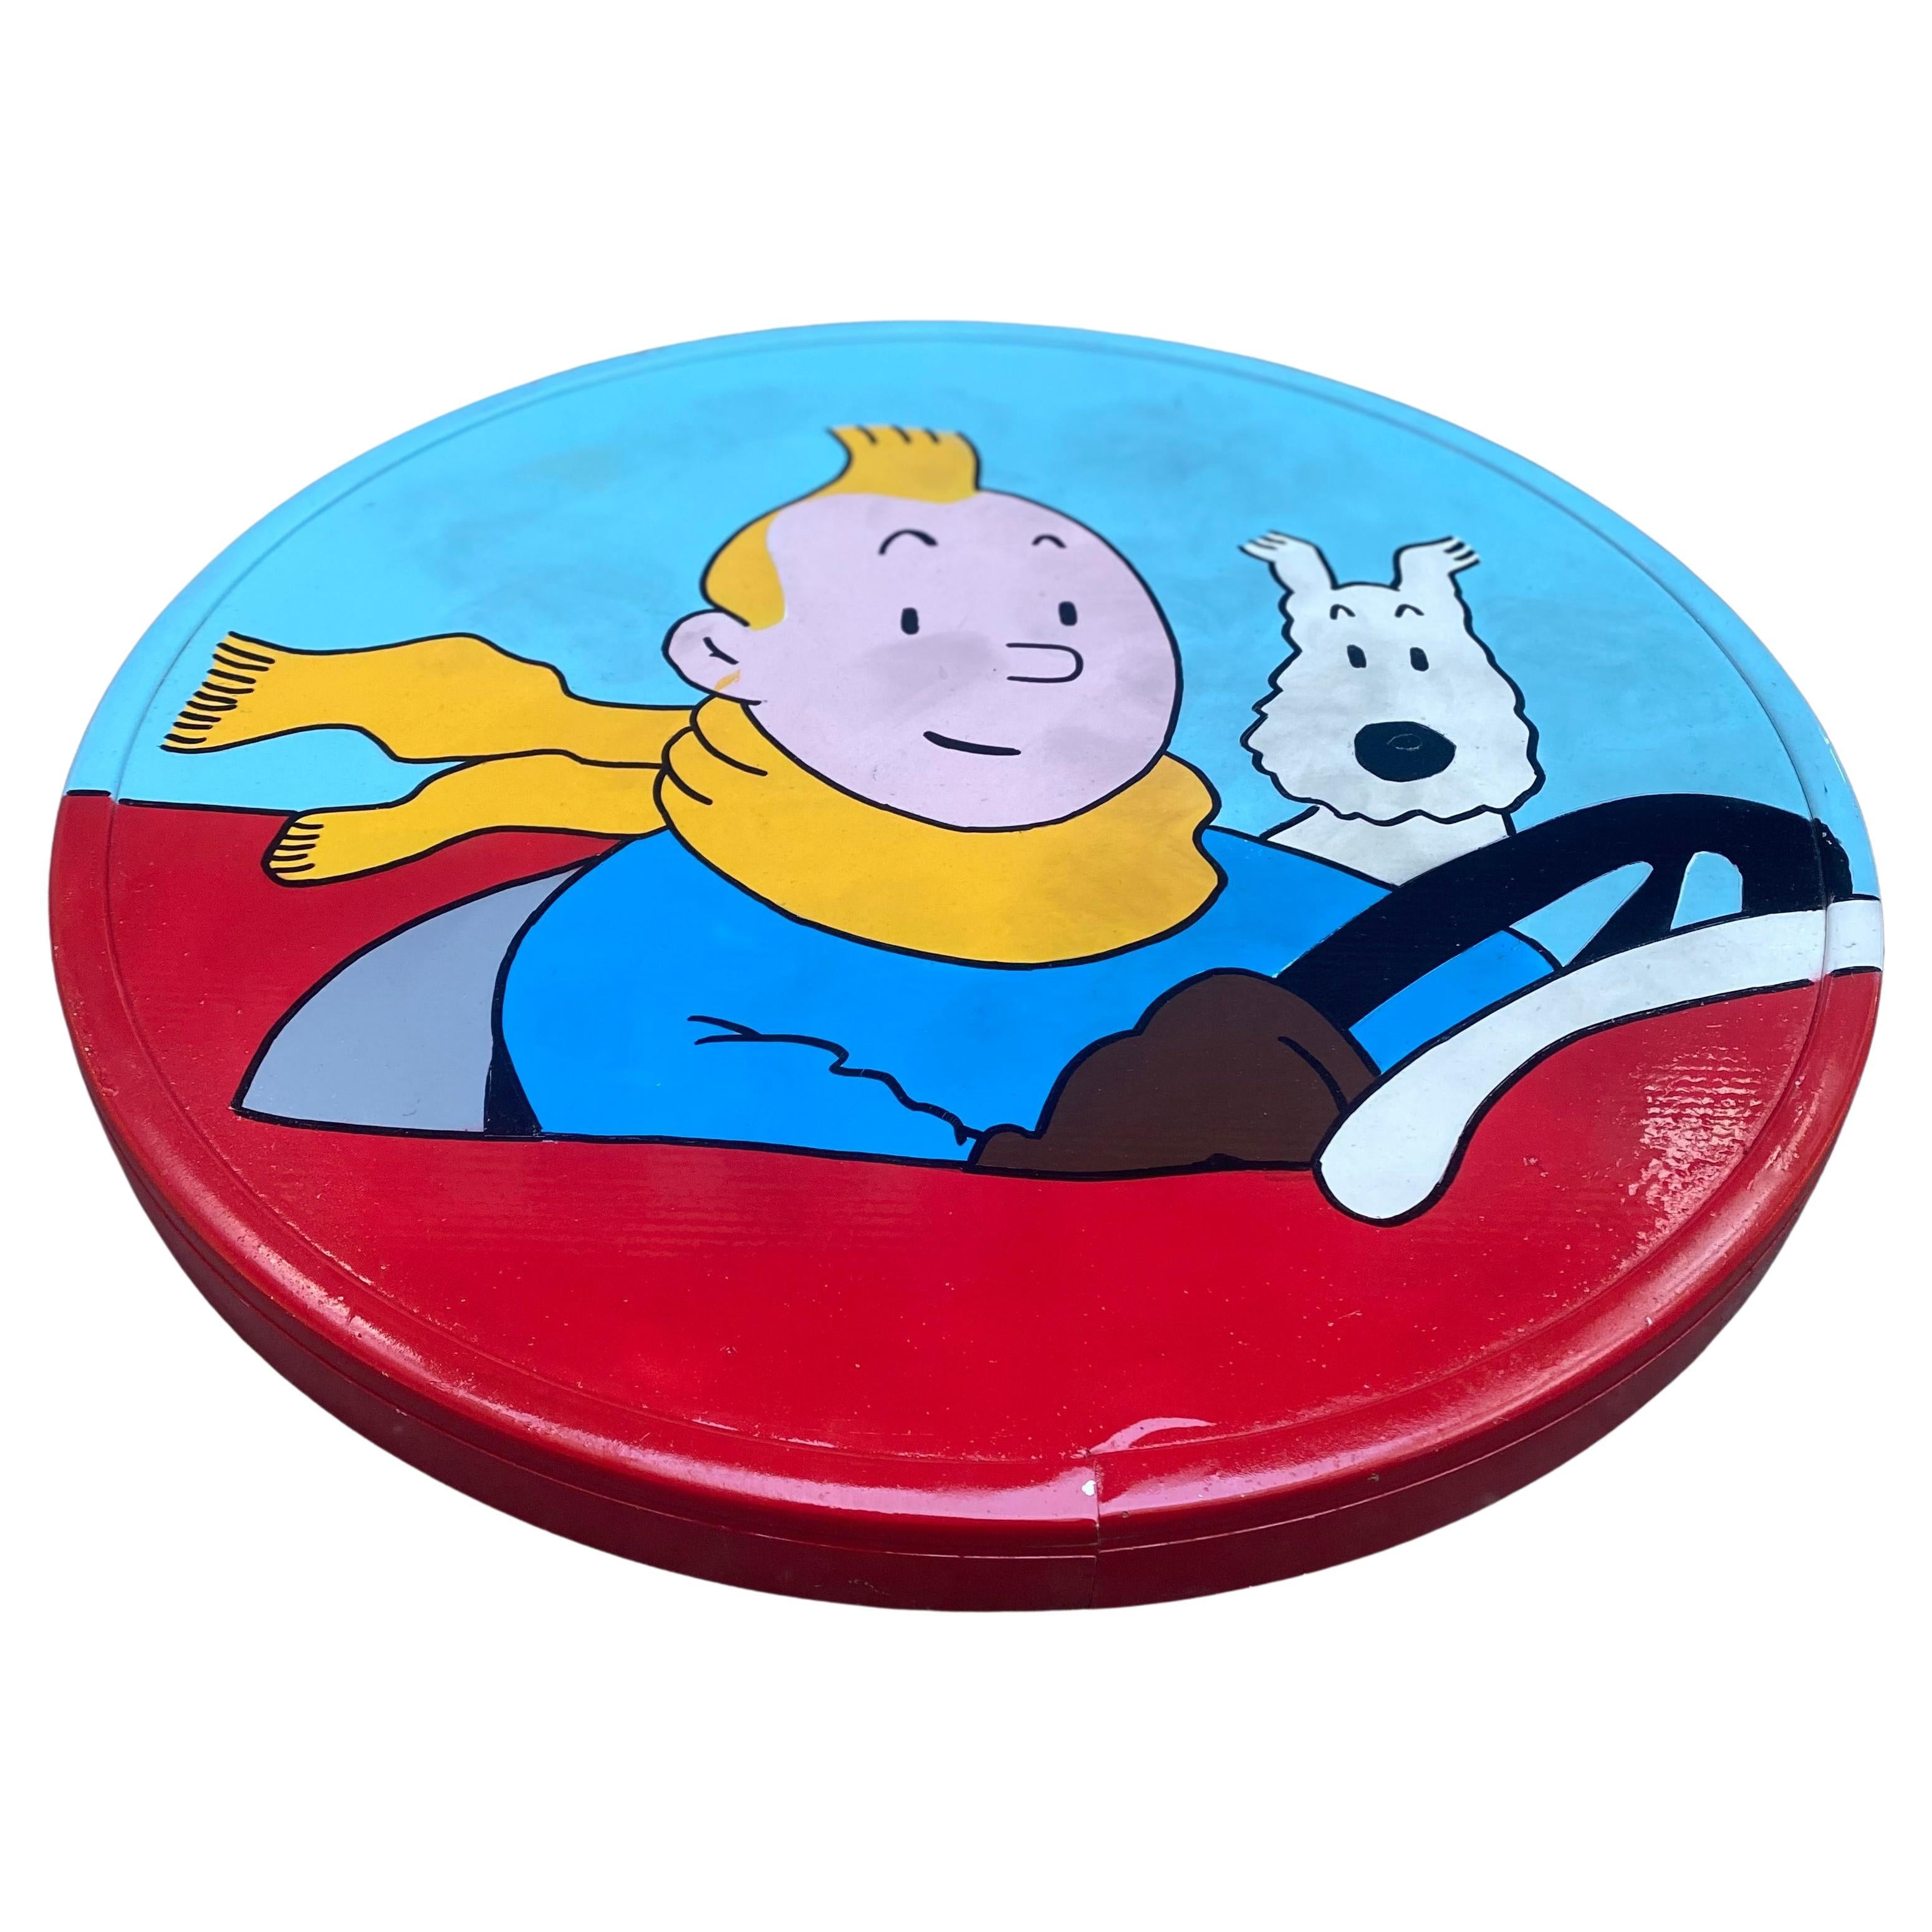 Tintin and Snowy in Amilcar, Vinc 